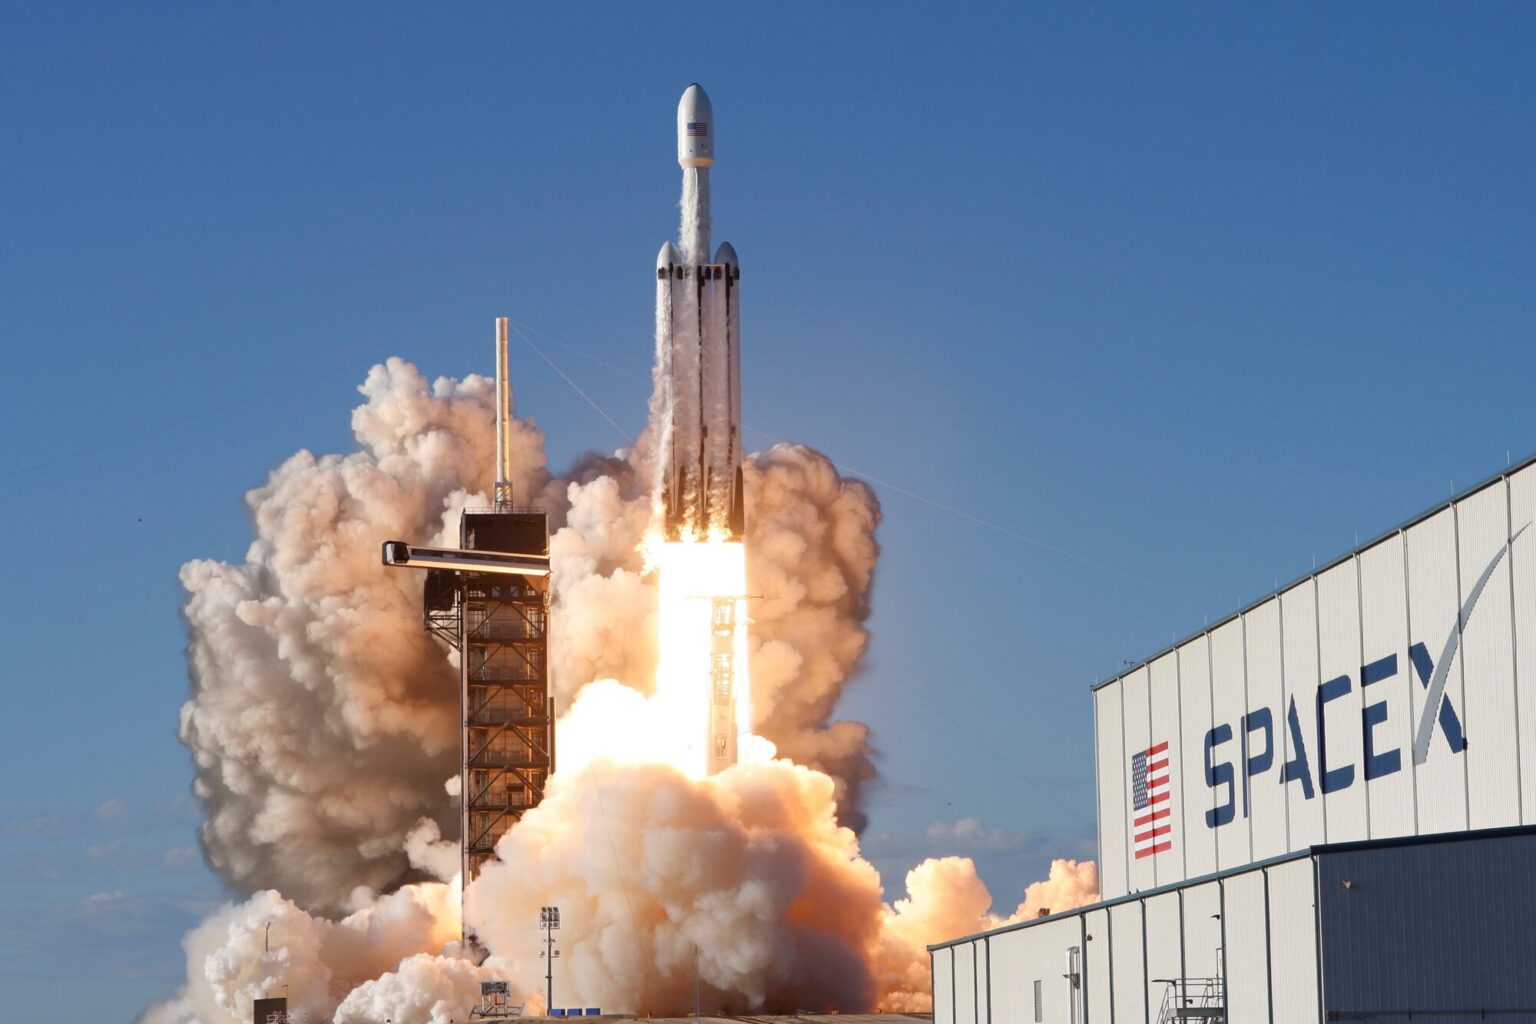 SpaceX and Blue Origin really seem like they’re battling it out. Could it be another star wars? Find out more about the Falcon 9 launch now.